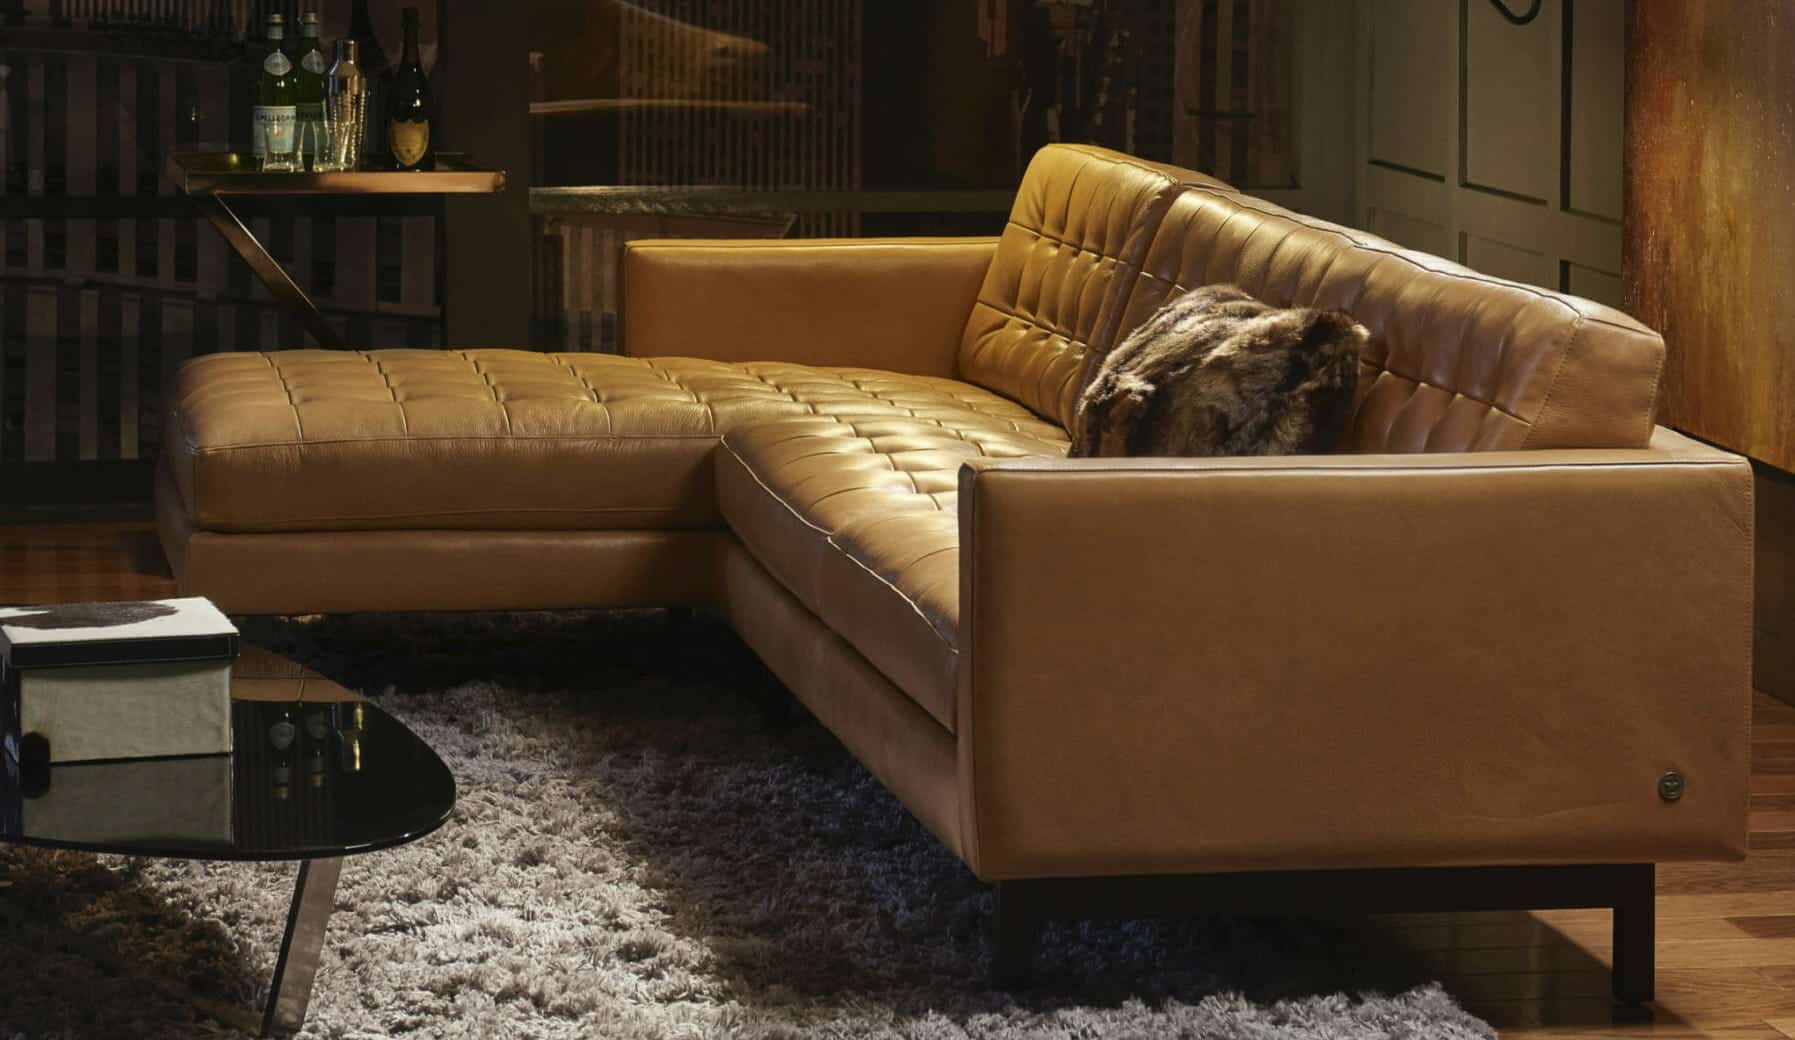 Vintage Leather Sofa from San Francisco Design: Brown Leather sofa